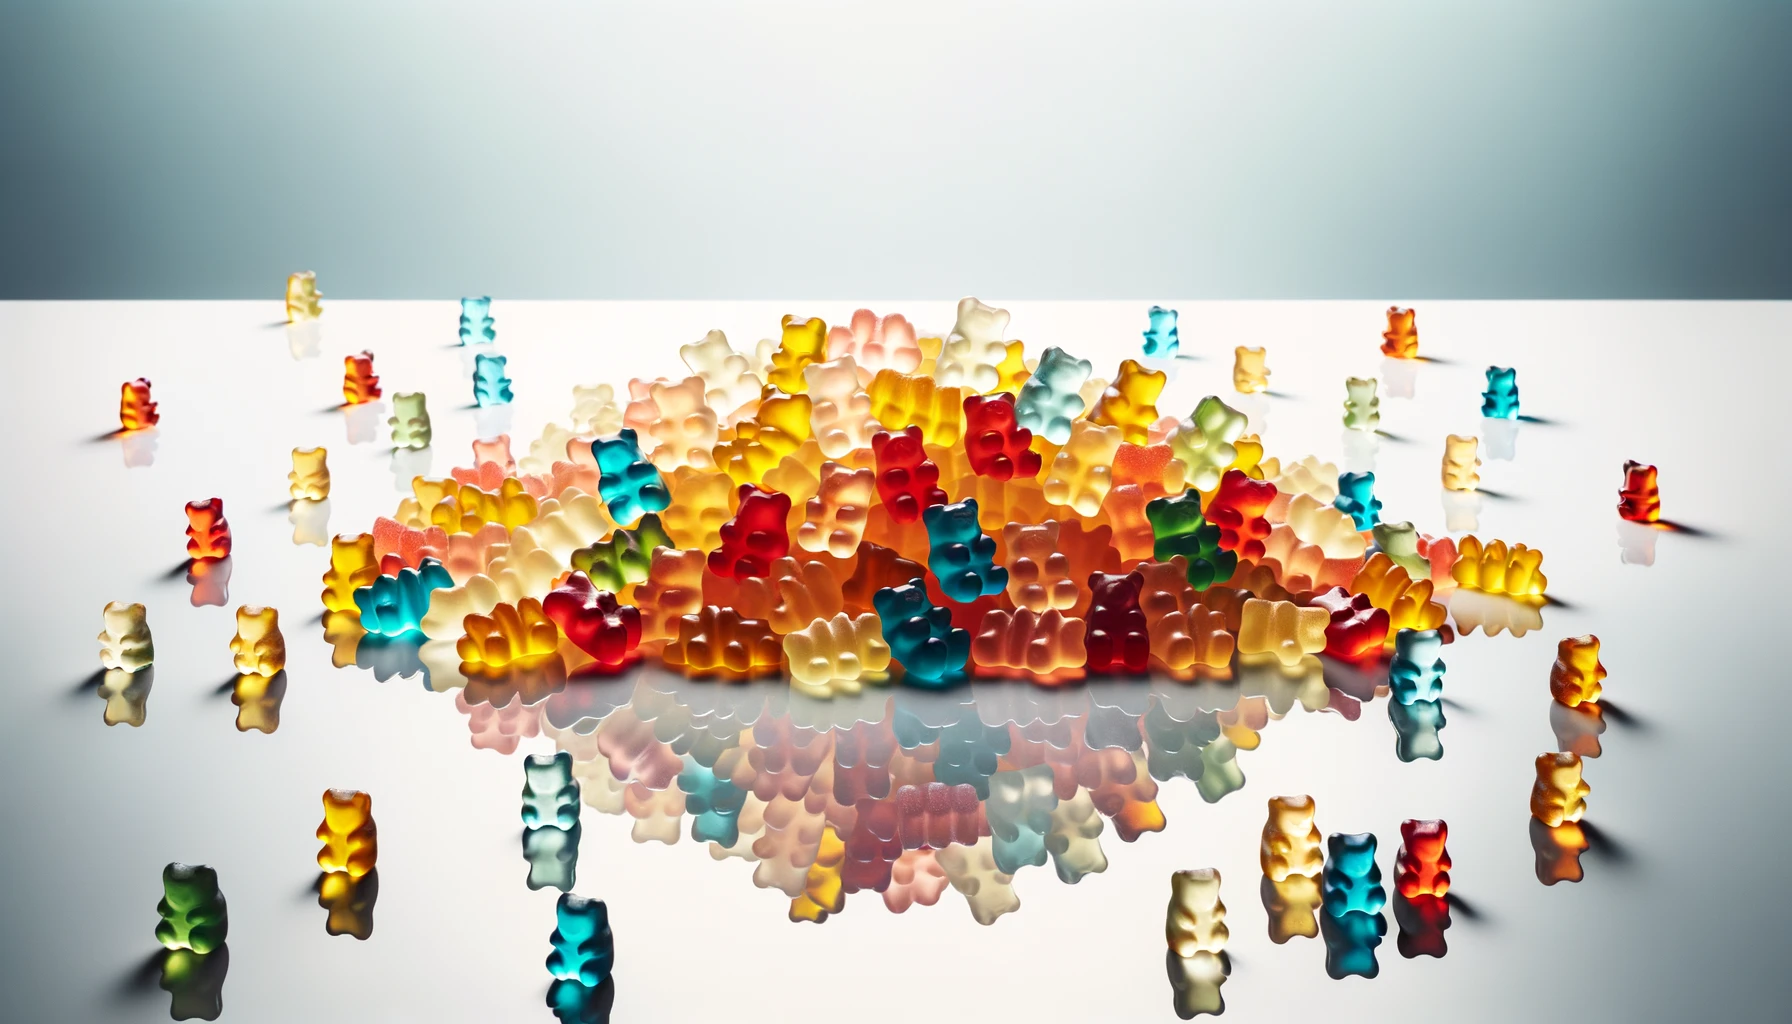 Landscape image of gummy bears playfully scattered on a reflective white surface, with some bears overlapping, capturing the translucent nature and the diverse shades of these candies.